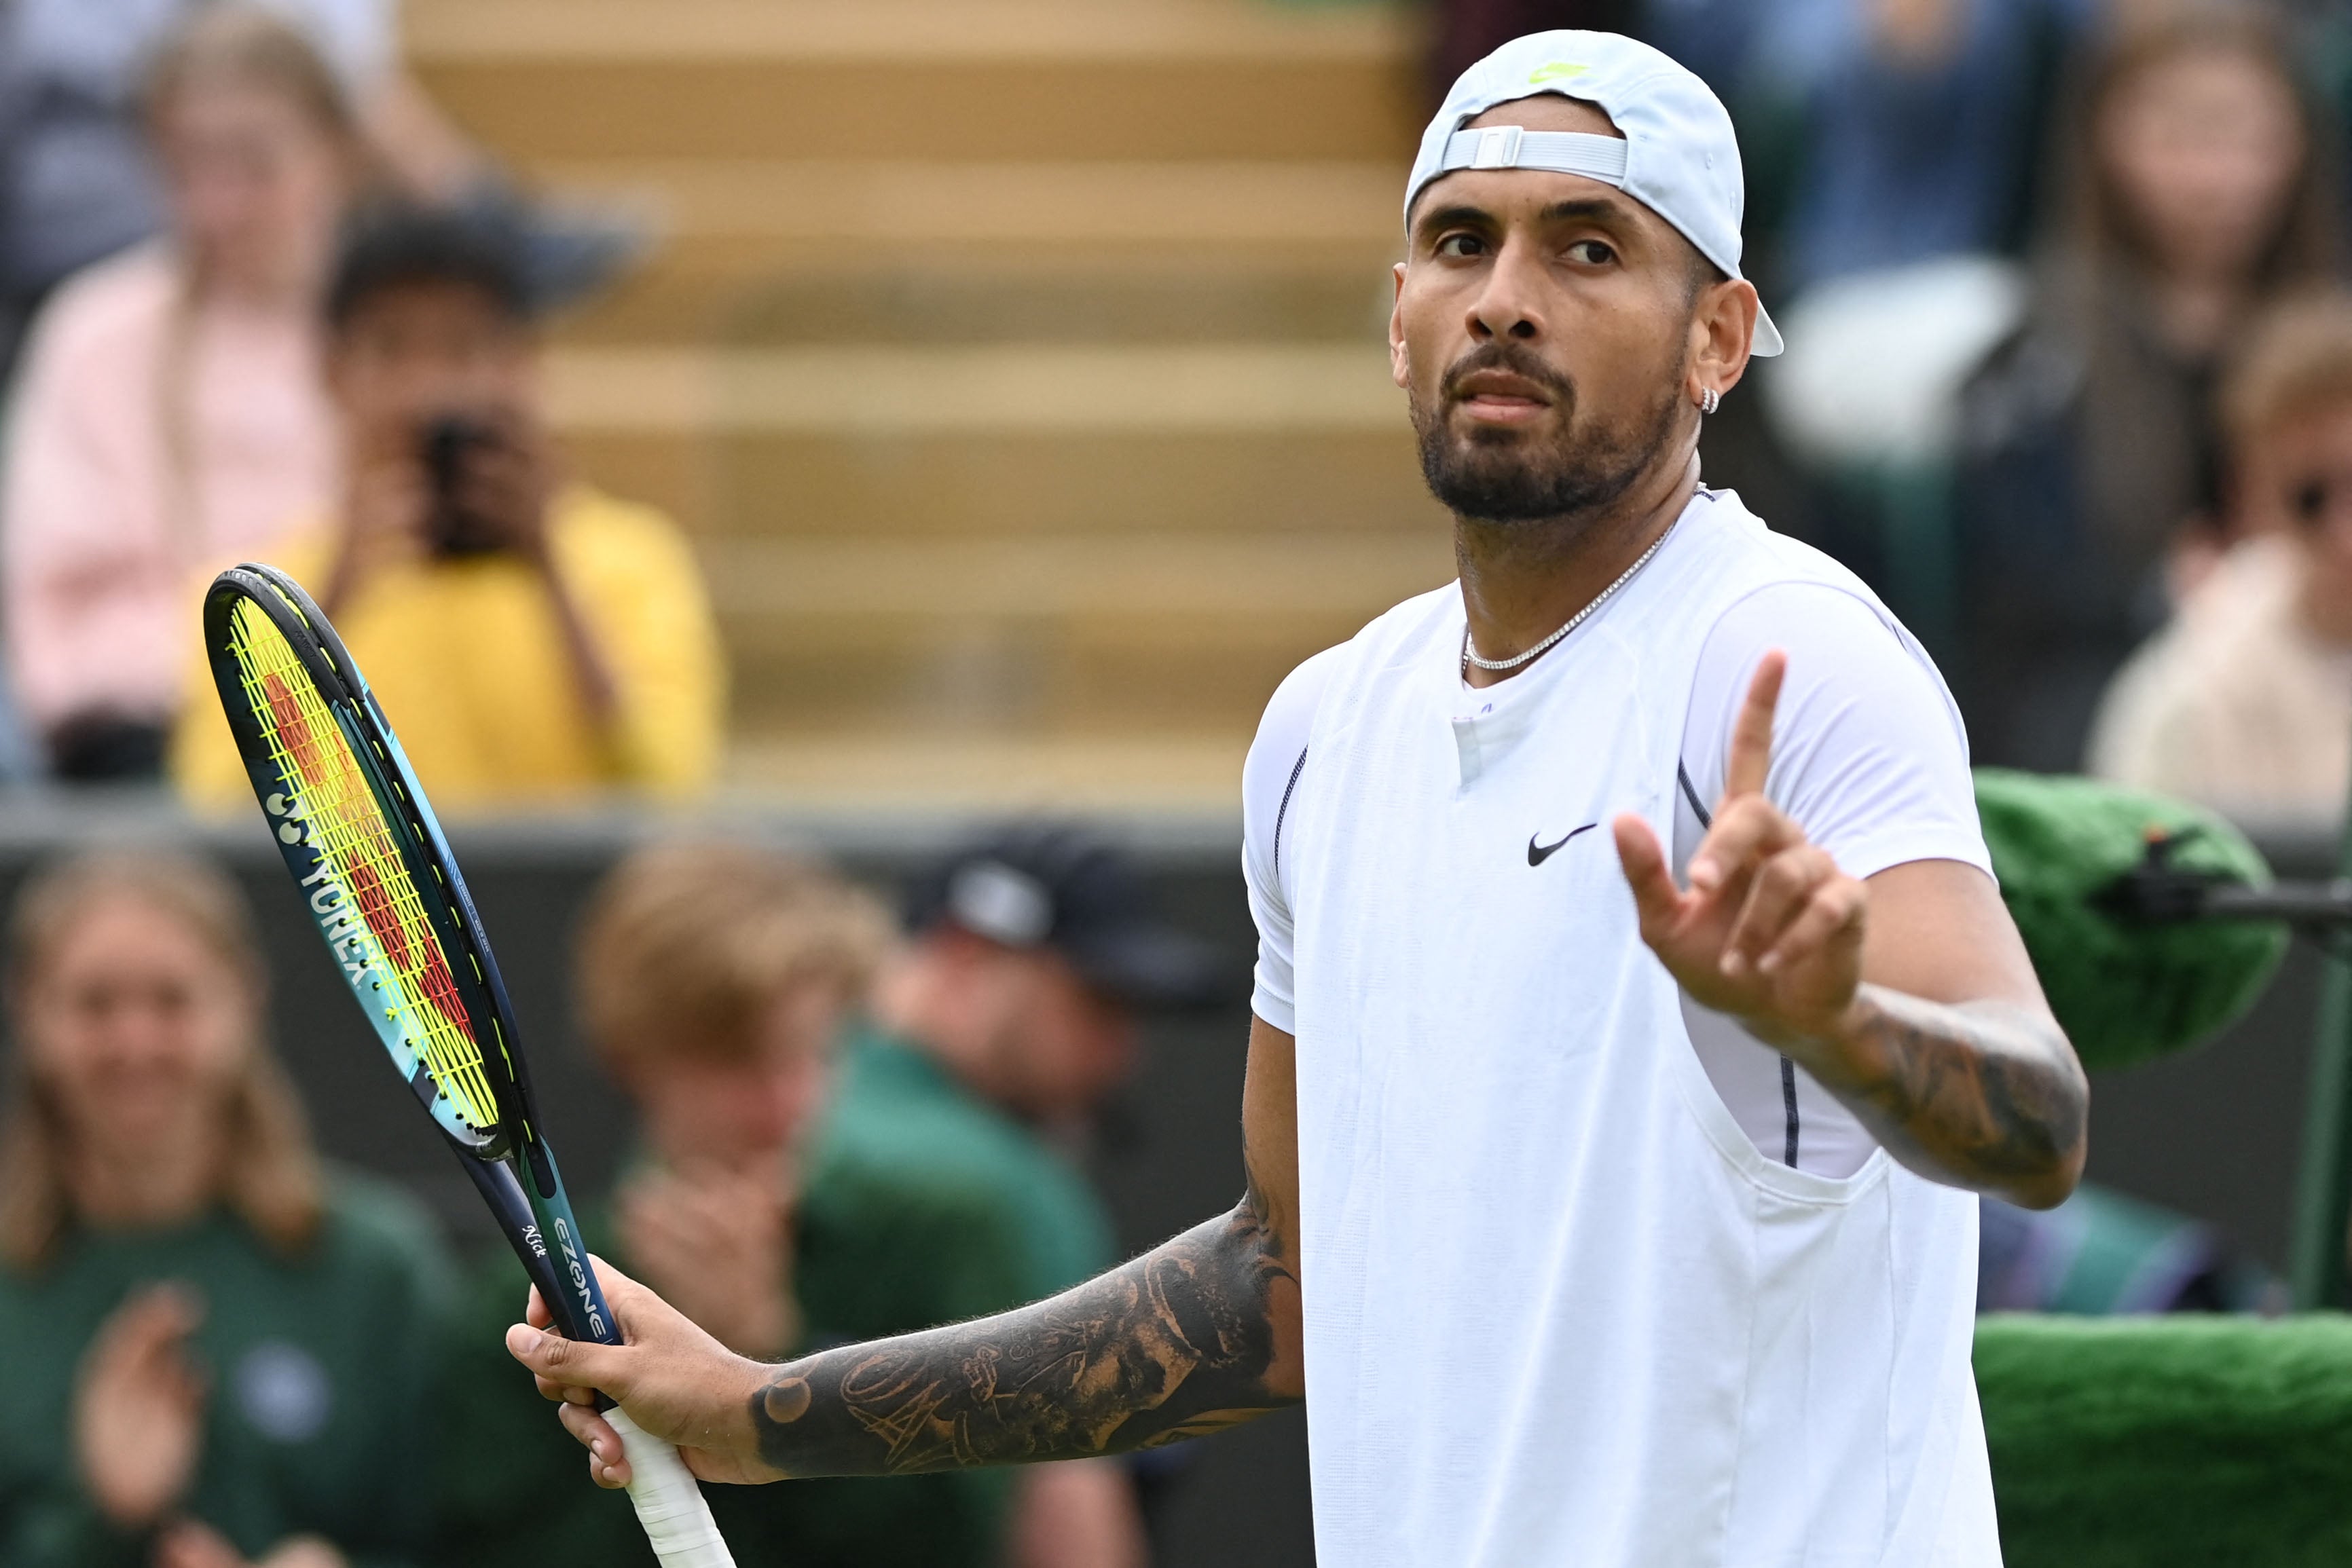 Wimbledon 2022 Nick Kyrgios hopes for more rowdiness and loudness from crowd The Independent